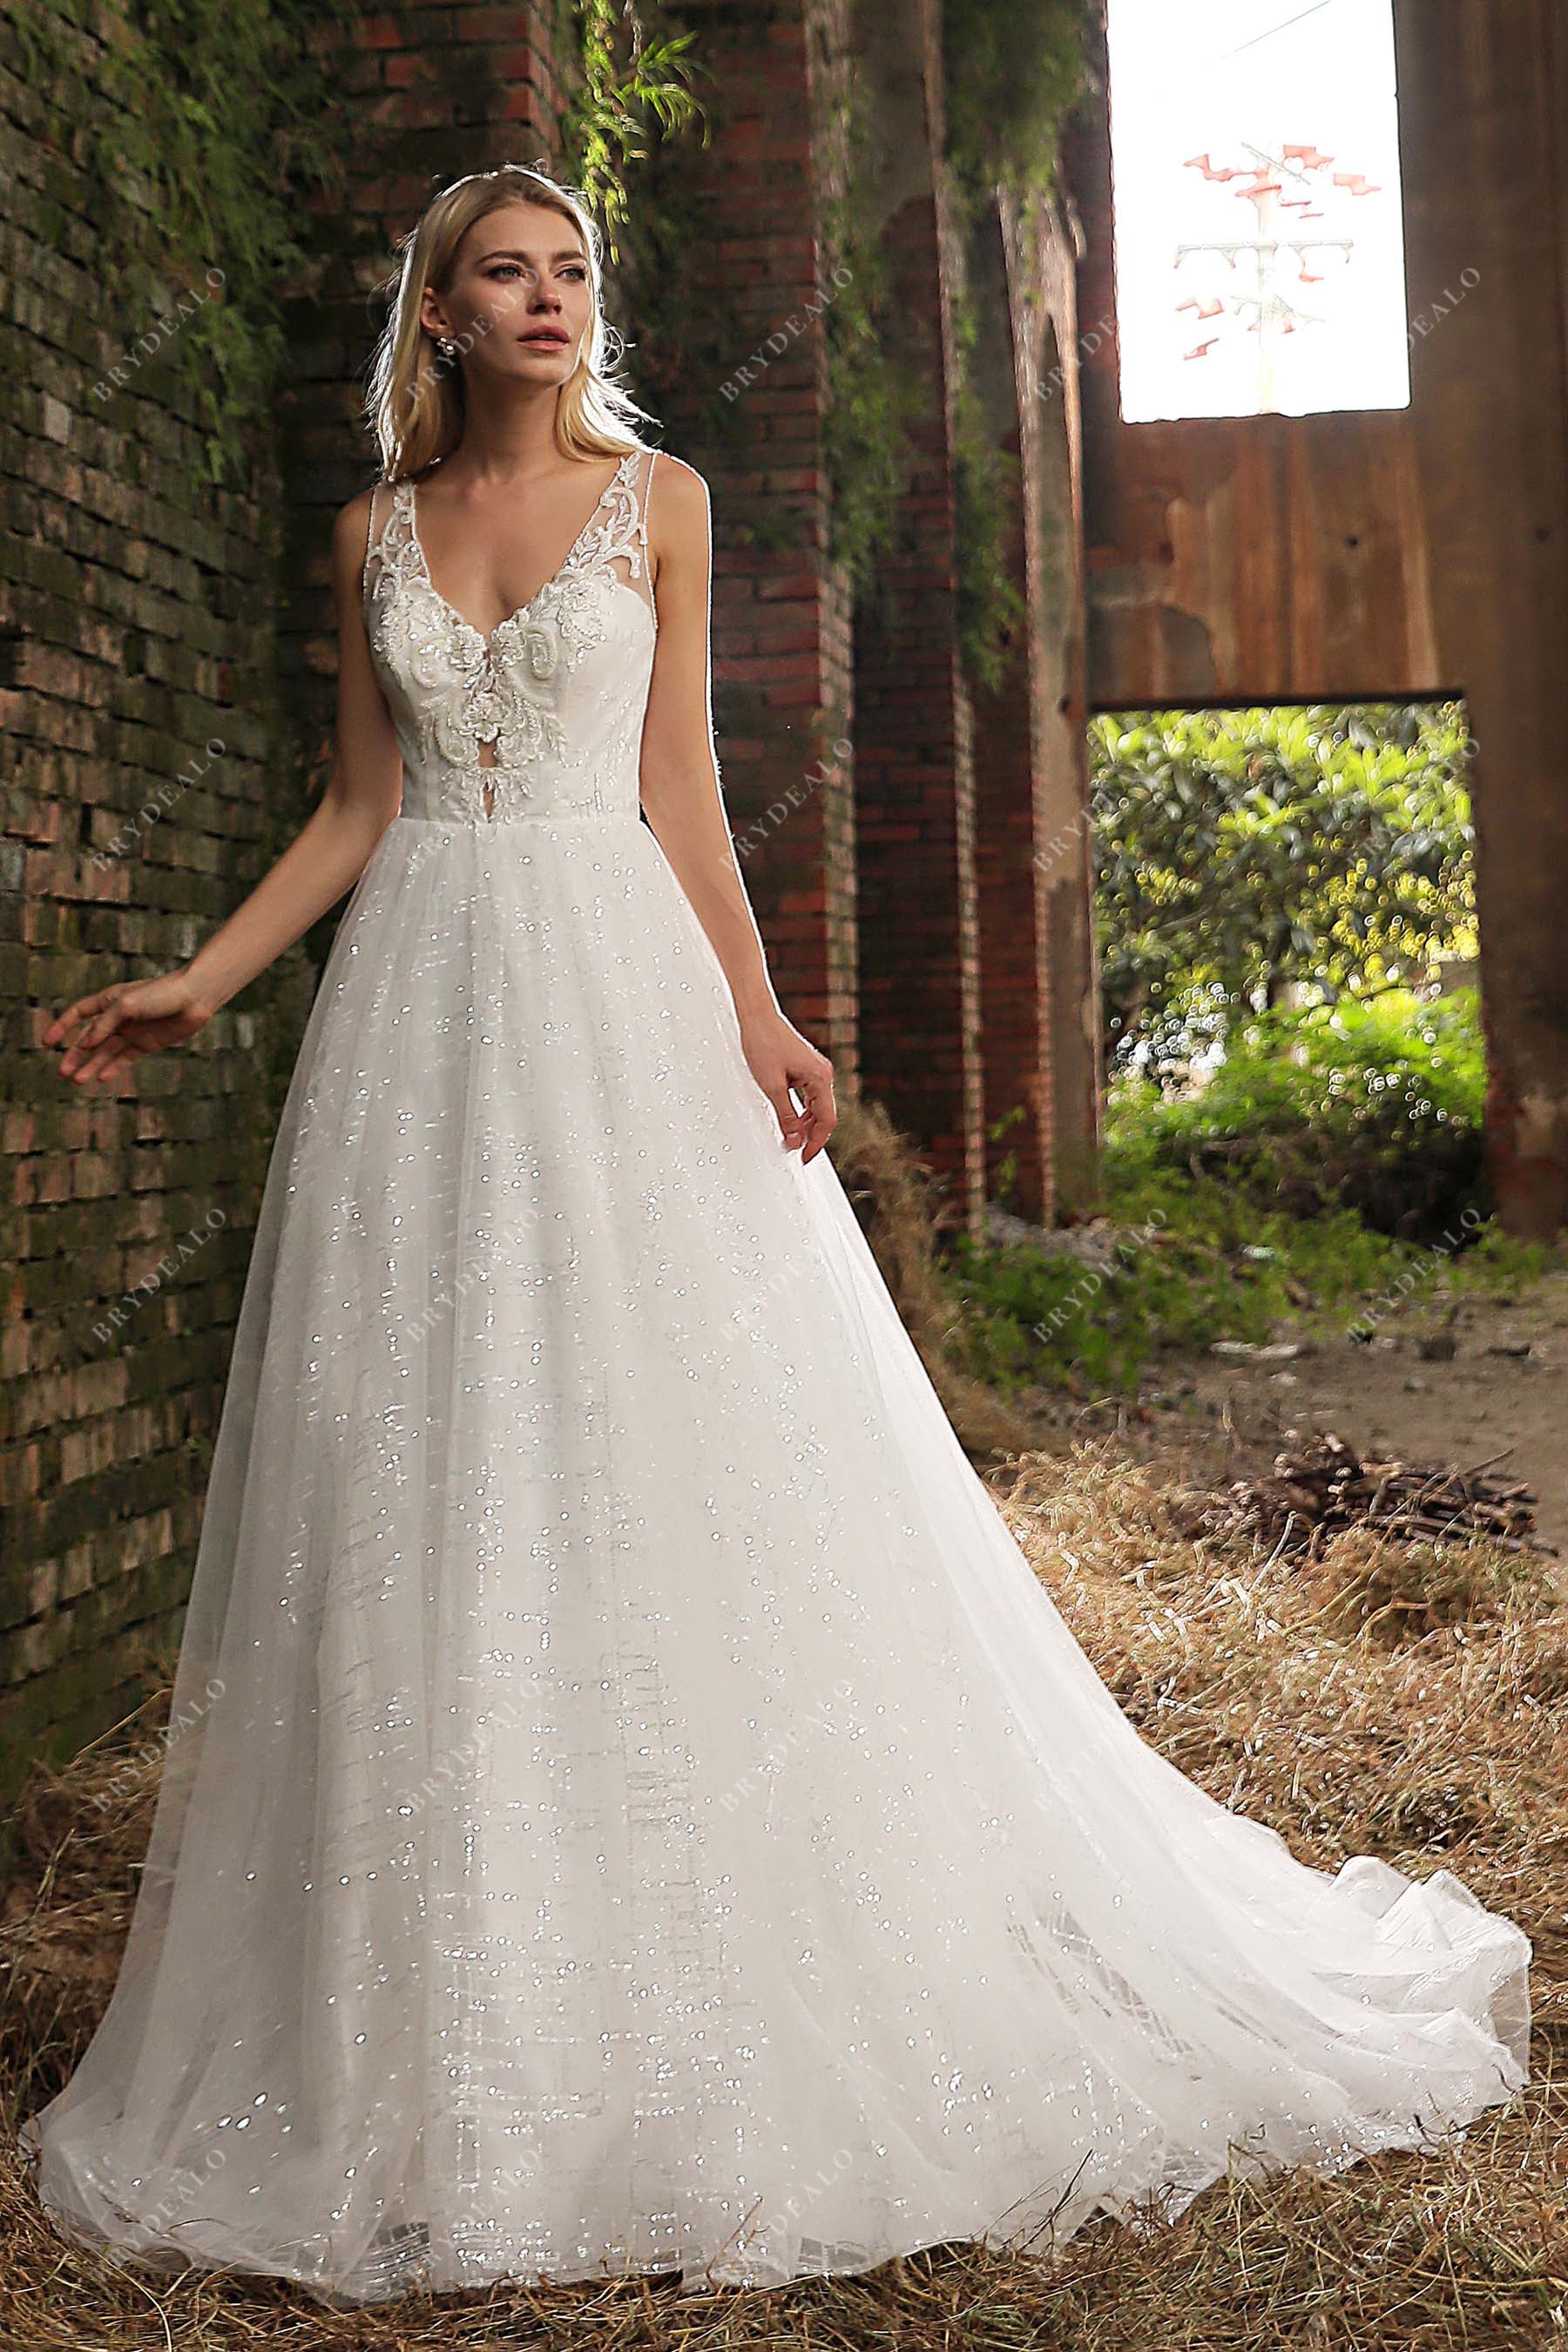 Sleeveless Beaded Lace Plunging V-neck A-line Sequined Bridal Dress